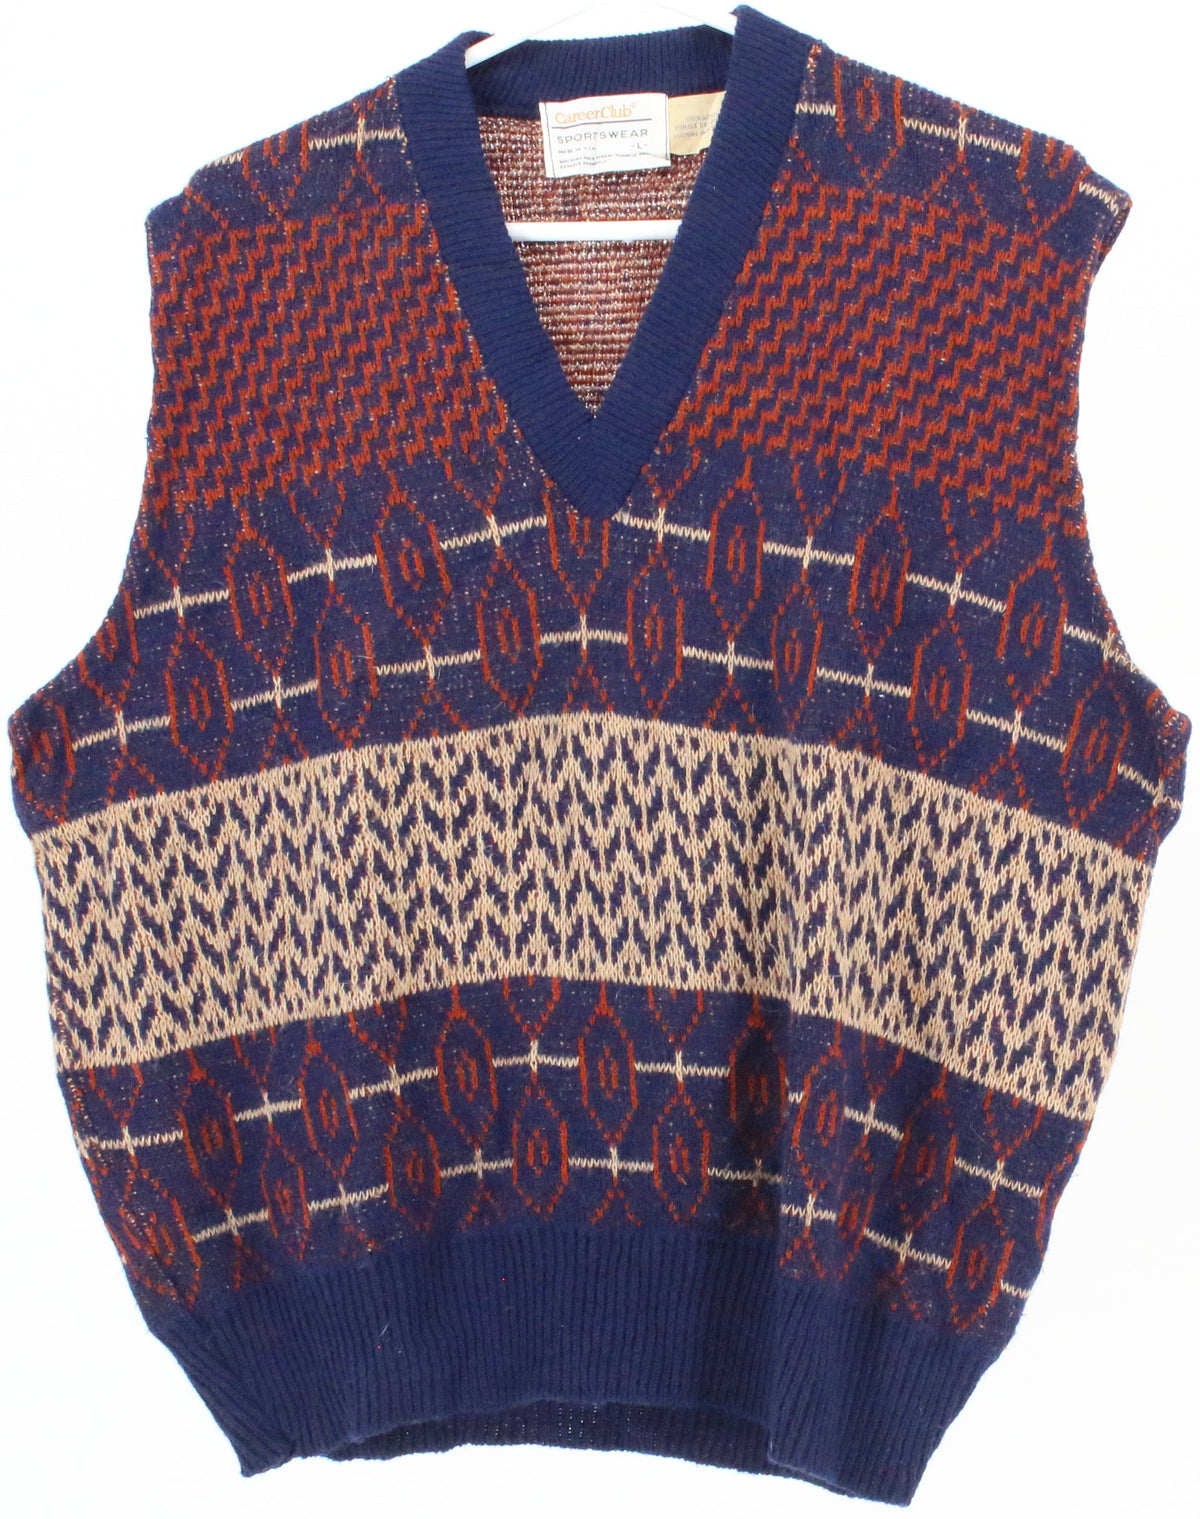 Career Club Sportswear Naby Blue Red and Beige Sleeveless Sweater